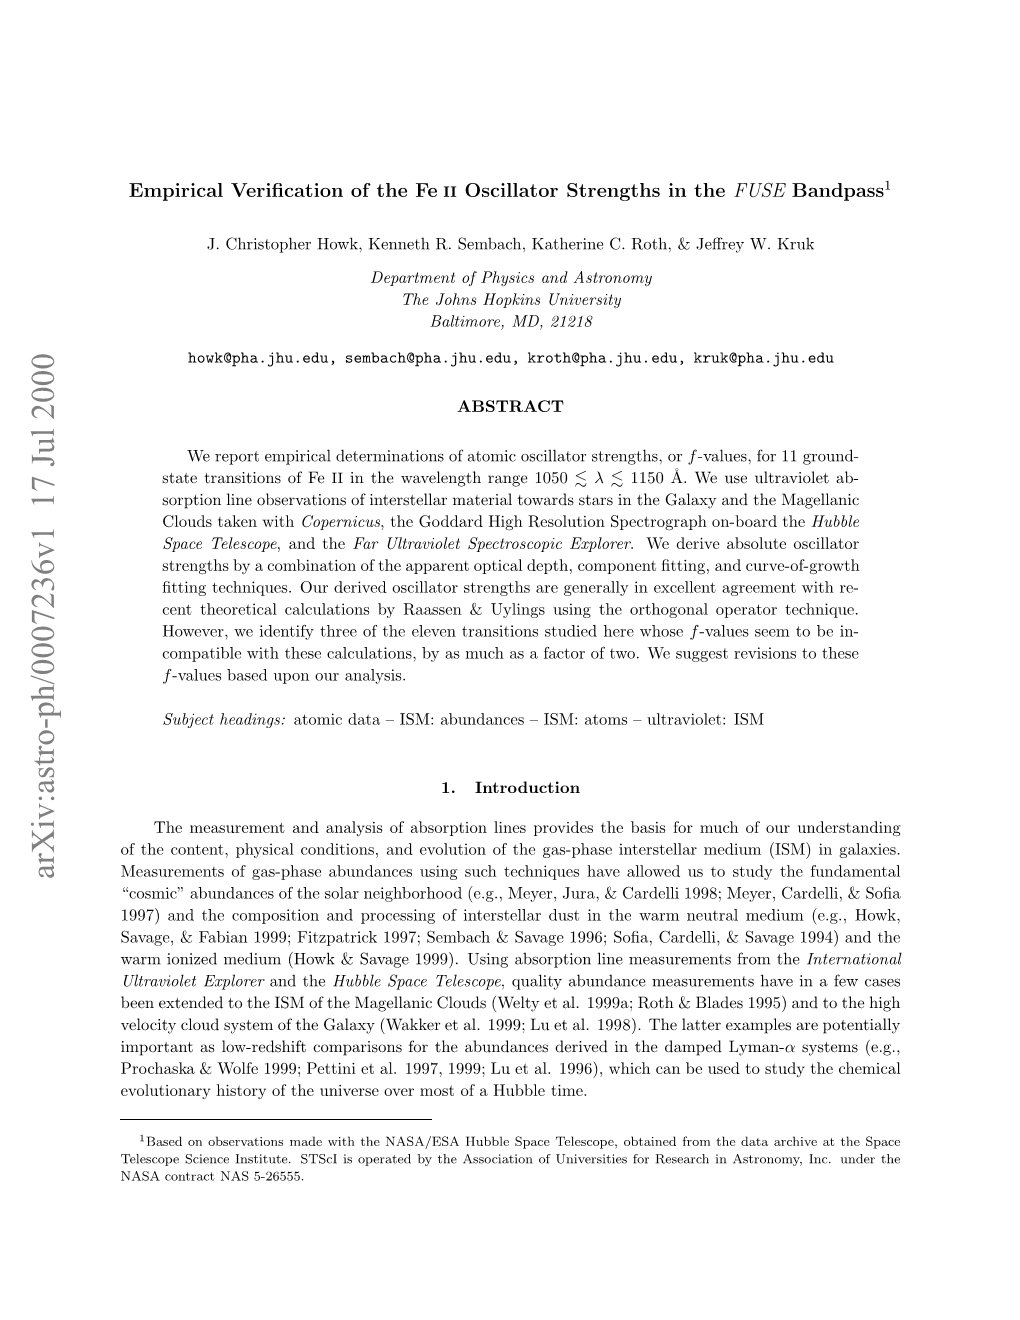 Empirical Verification of the Fe II Oscillator Strengths in the FUSE